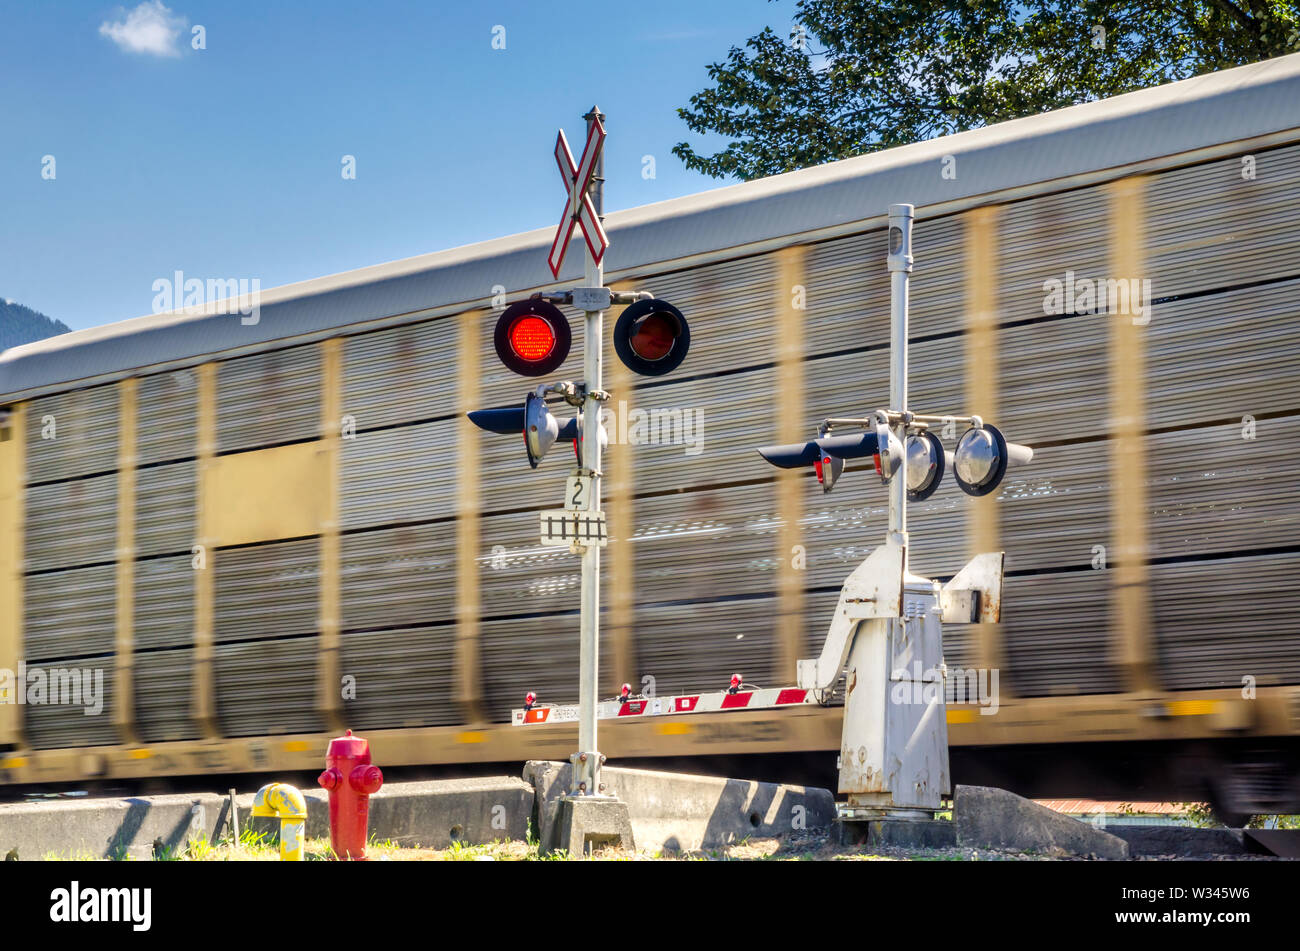 Freight train in motion at a level croosing Stock Photo